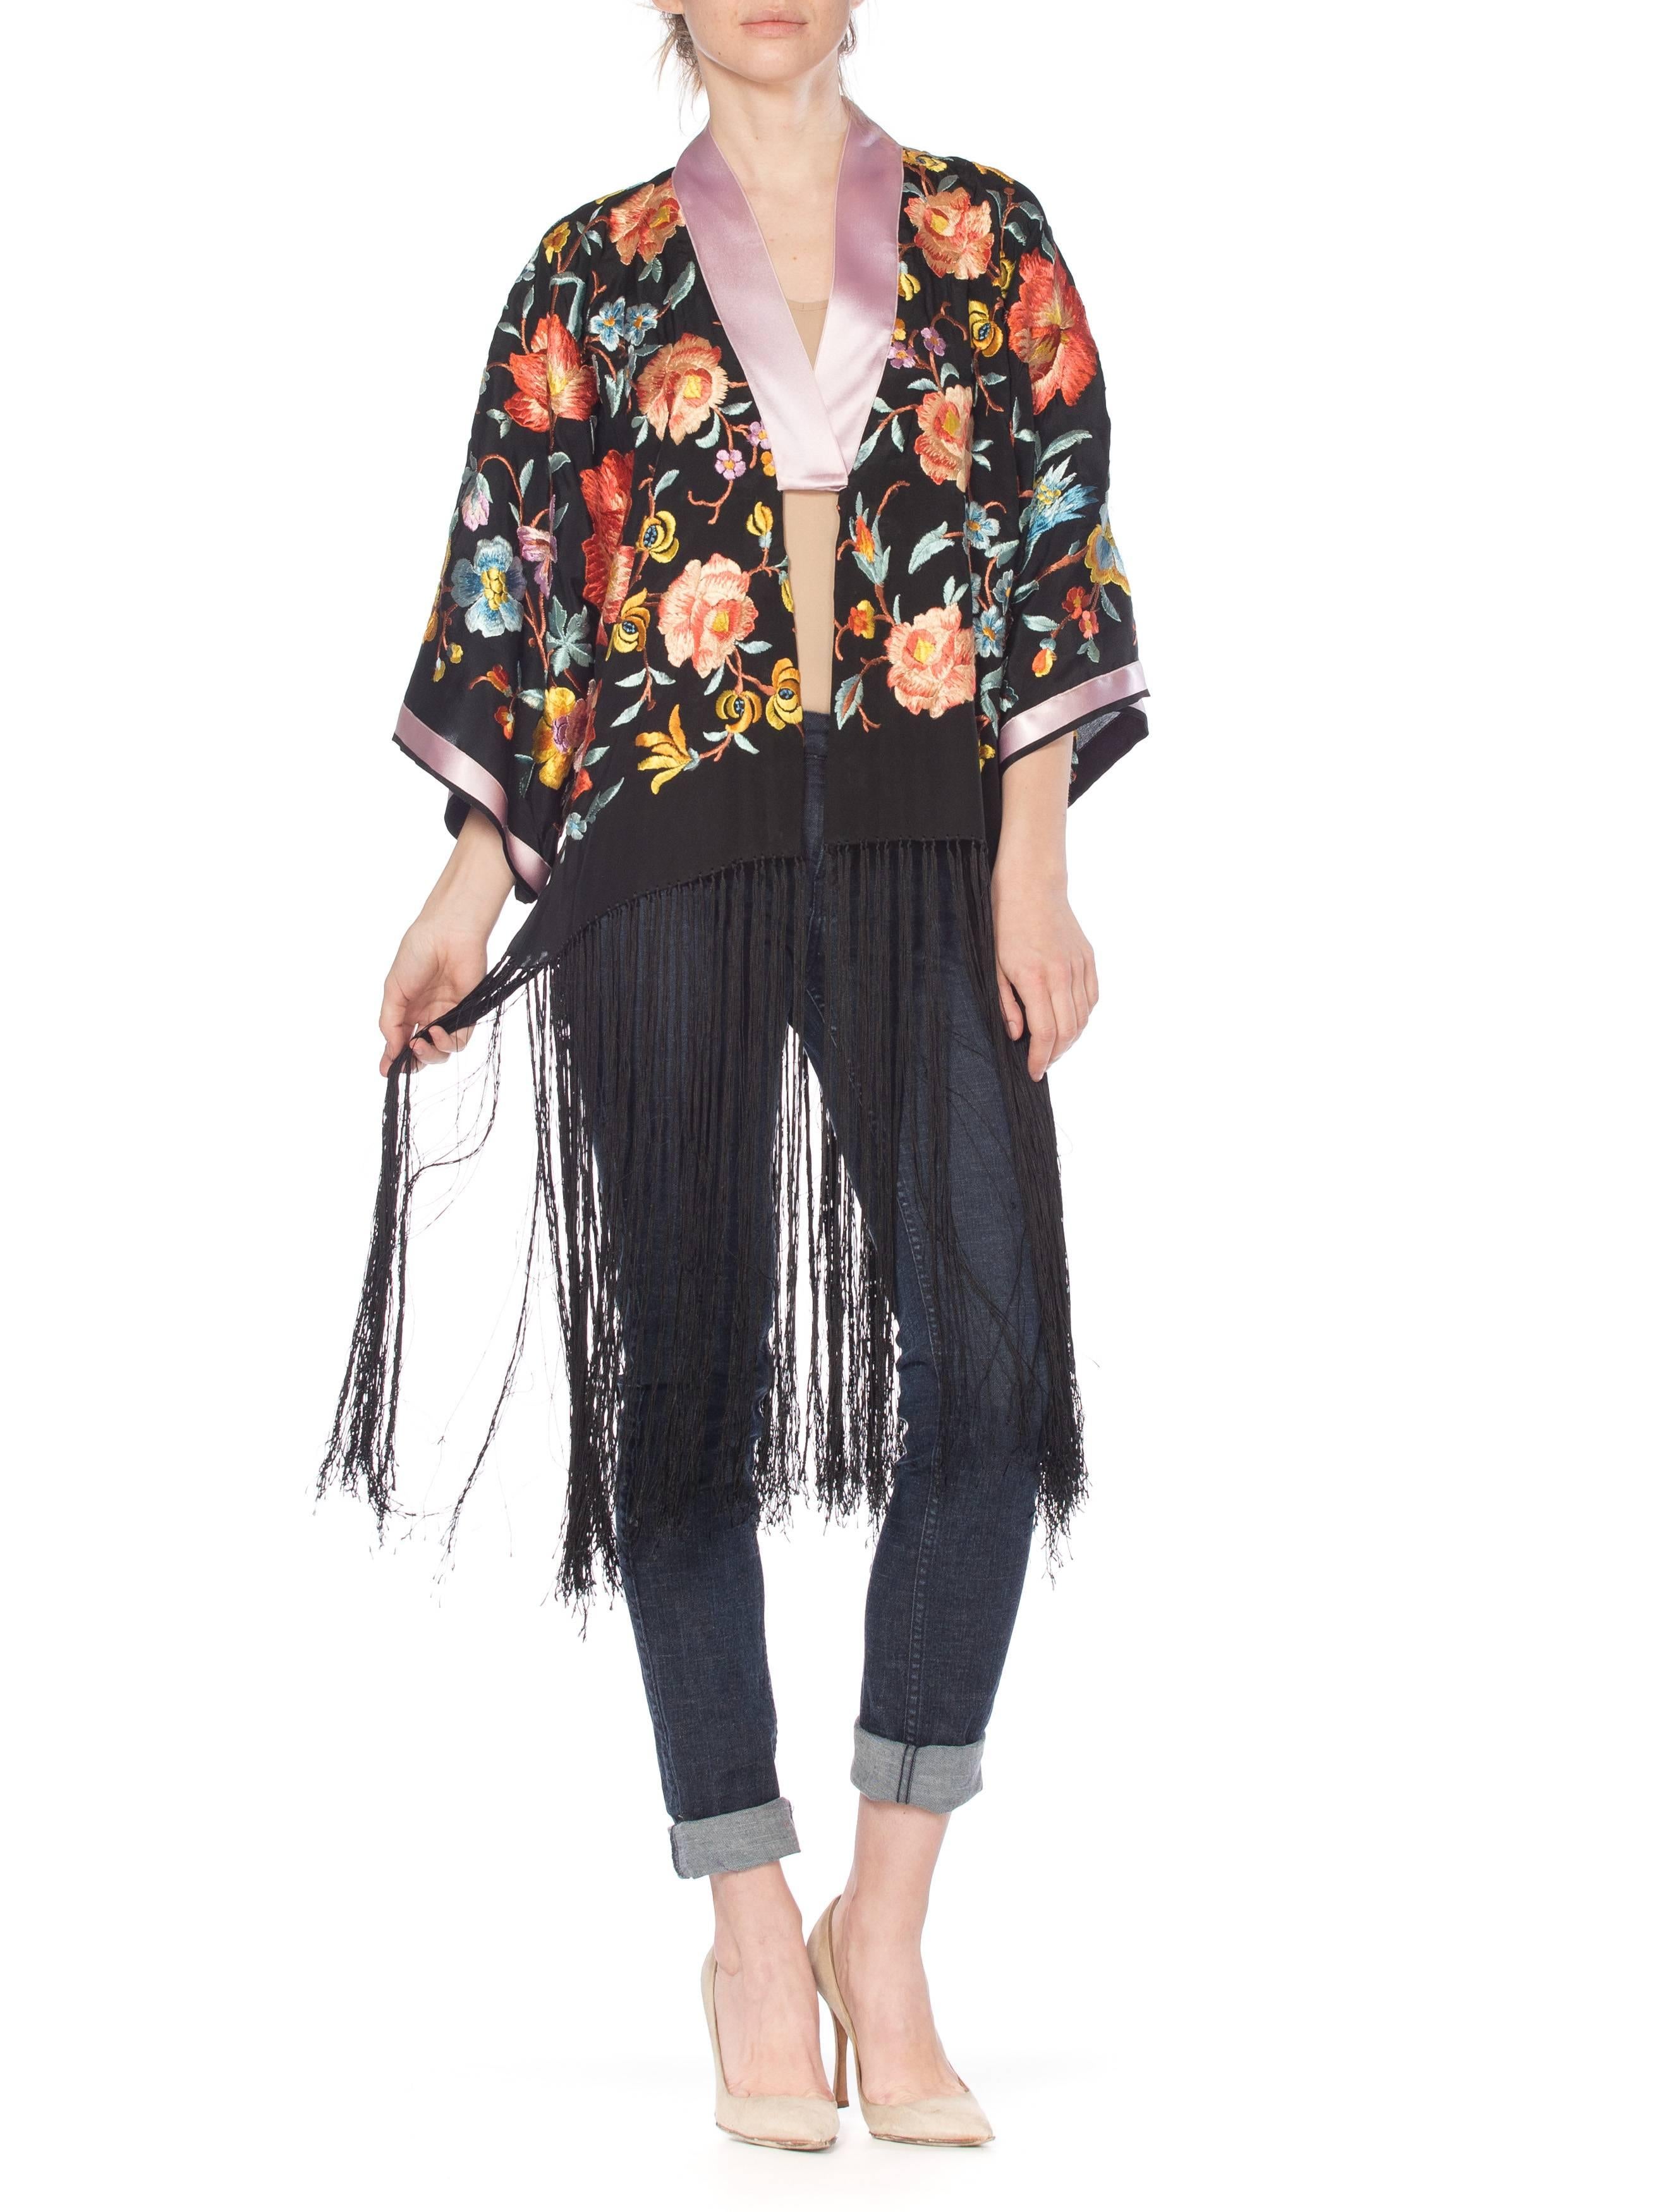 Women's or Men's 1920s Embroidered Kimono with Fringe